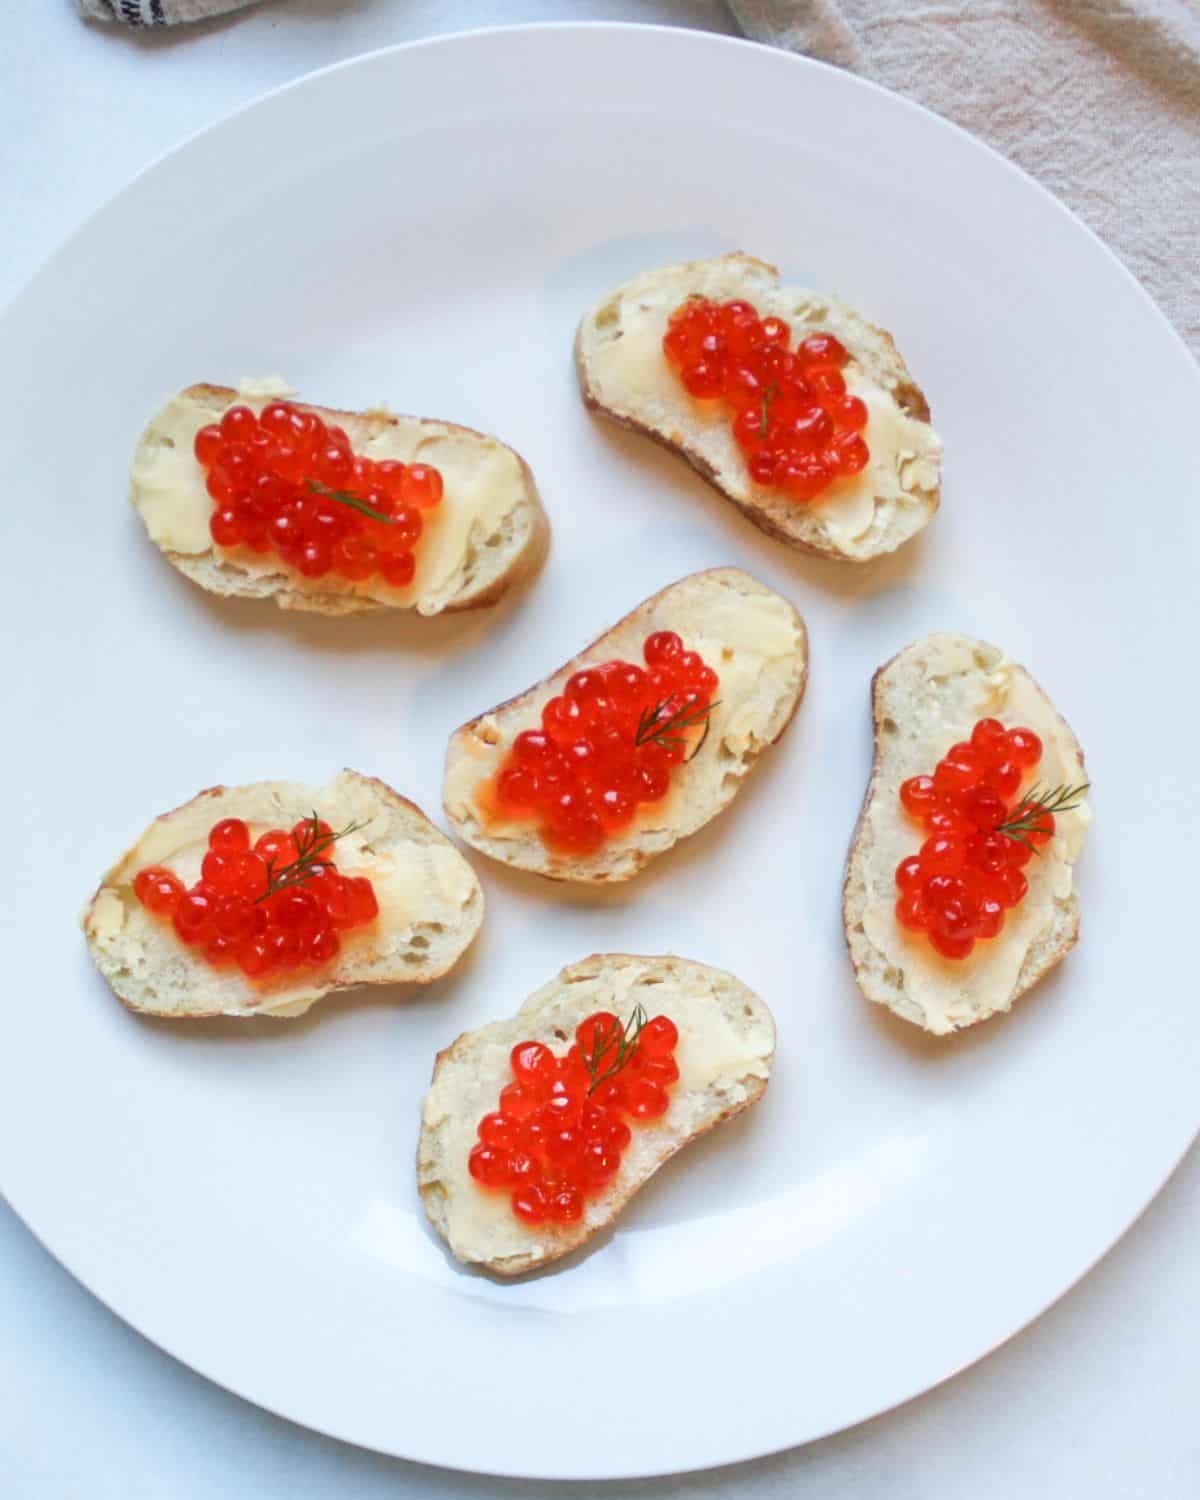 Six buttered baguette slices topped with red caviar on a white plate.